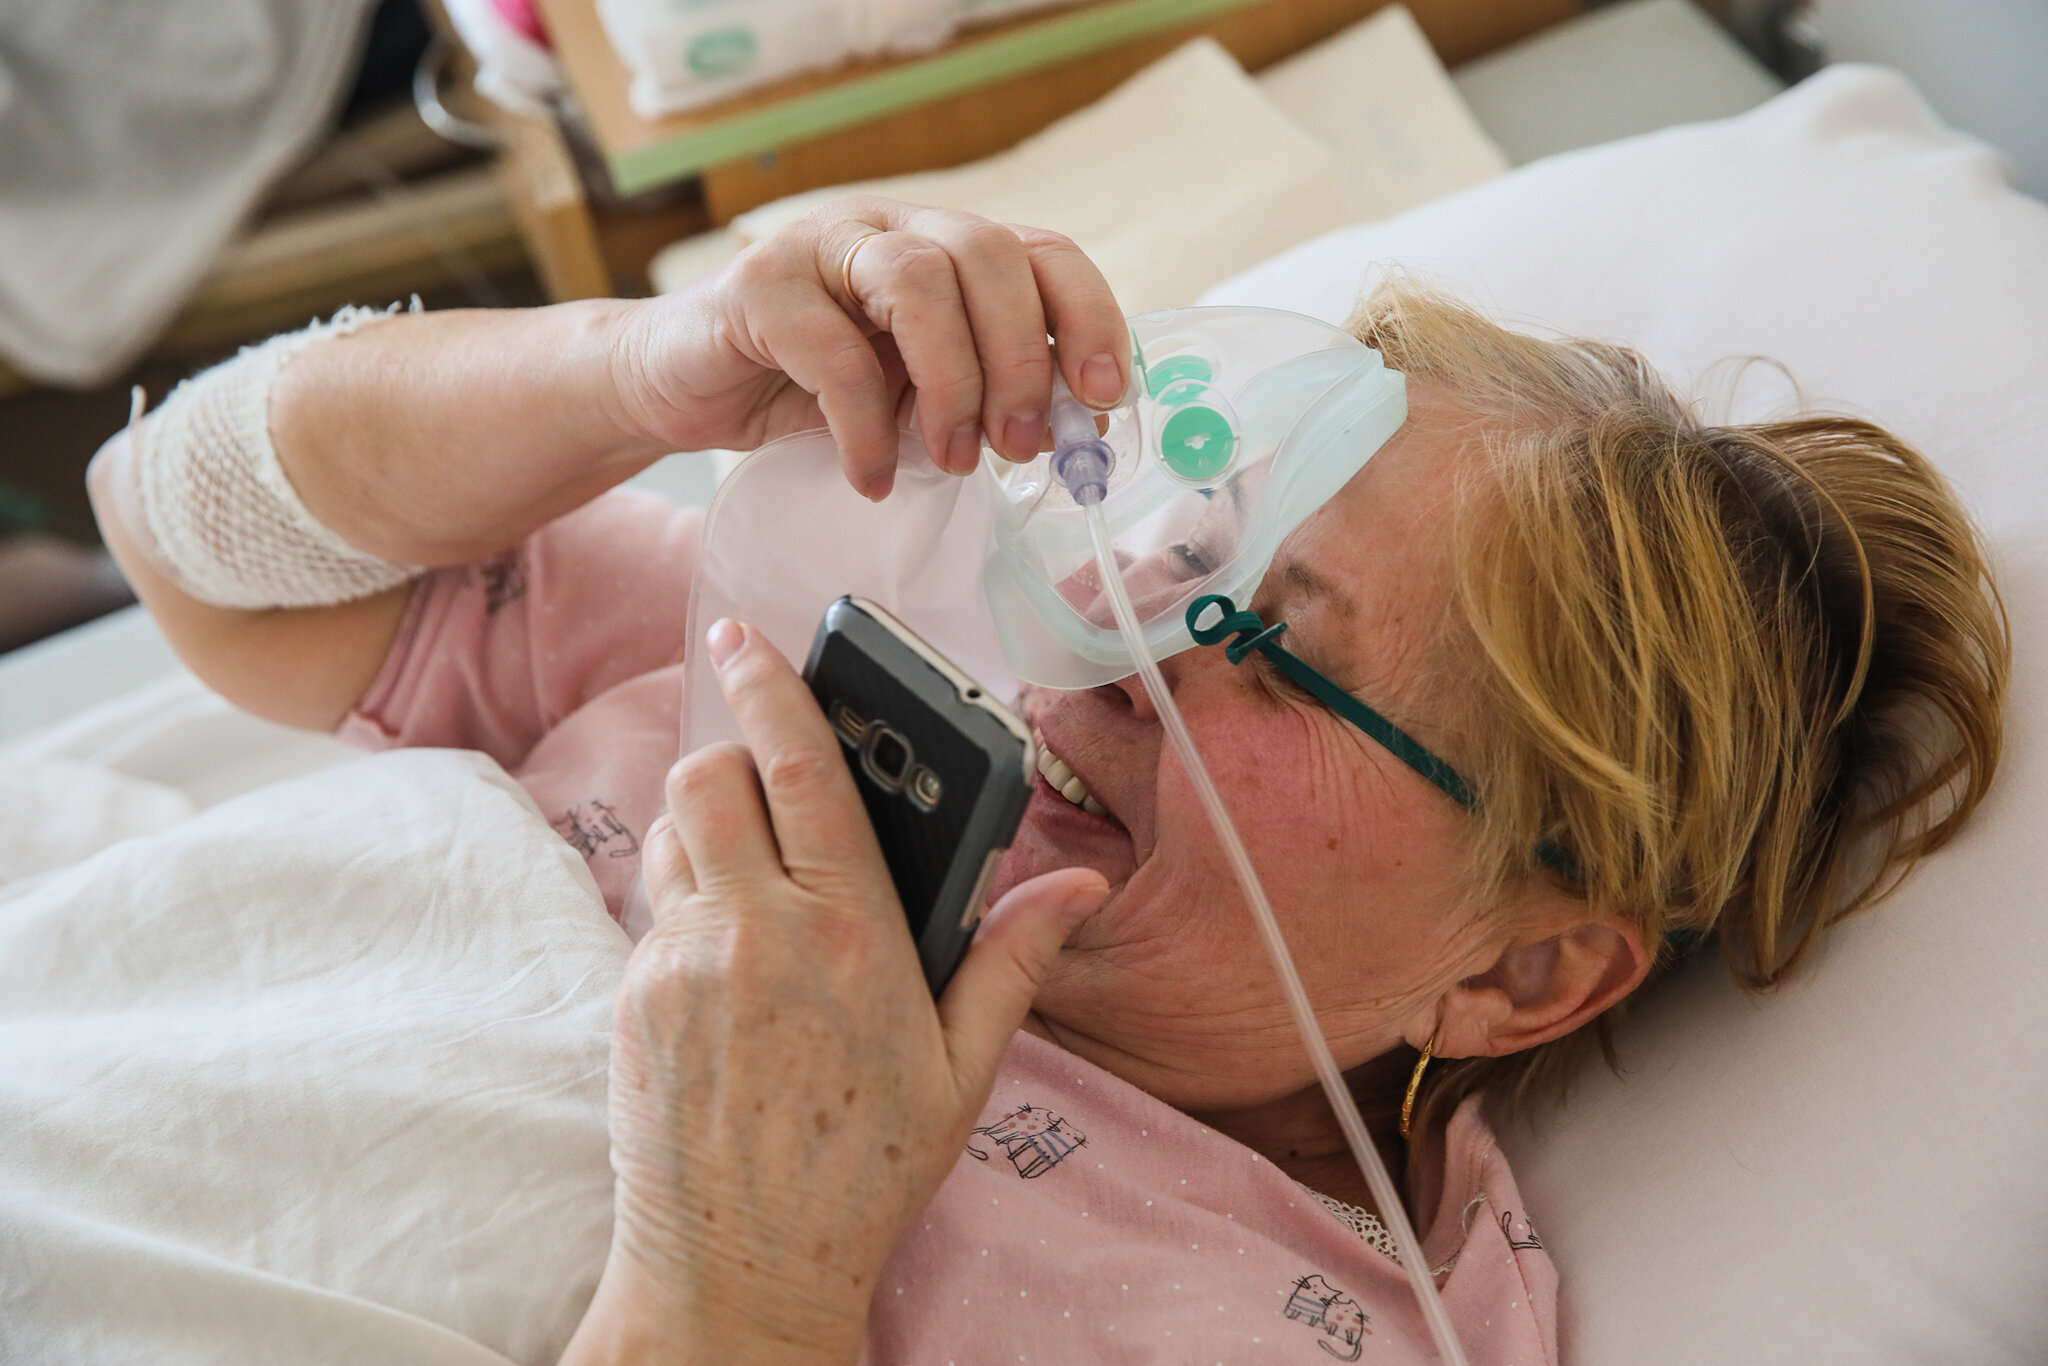 A patient takes her oxygen mask off for a moment while talking on the phone at Kolomyia District Hospital in Ivano-Frankivsk Oblast on March 16, 2021. Some patients can survive no more than several minutes without additional oxygen.